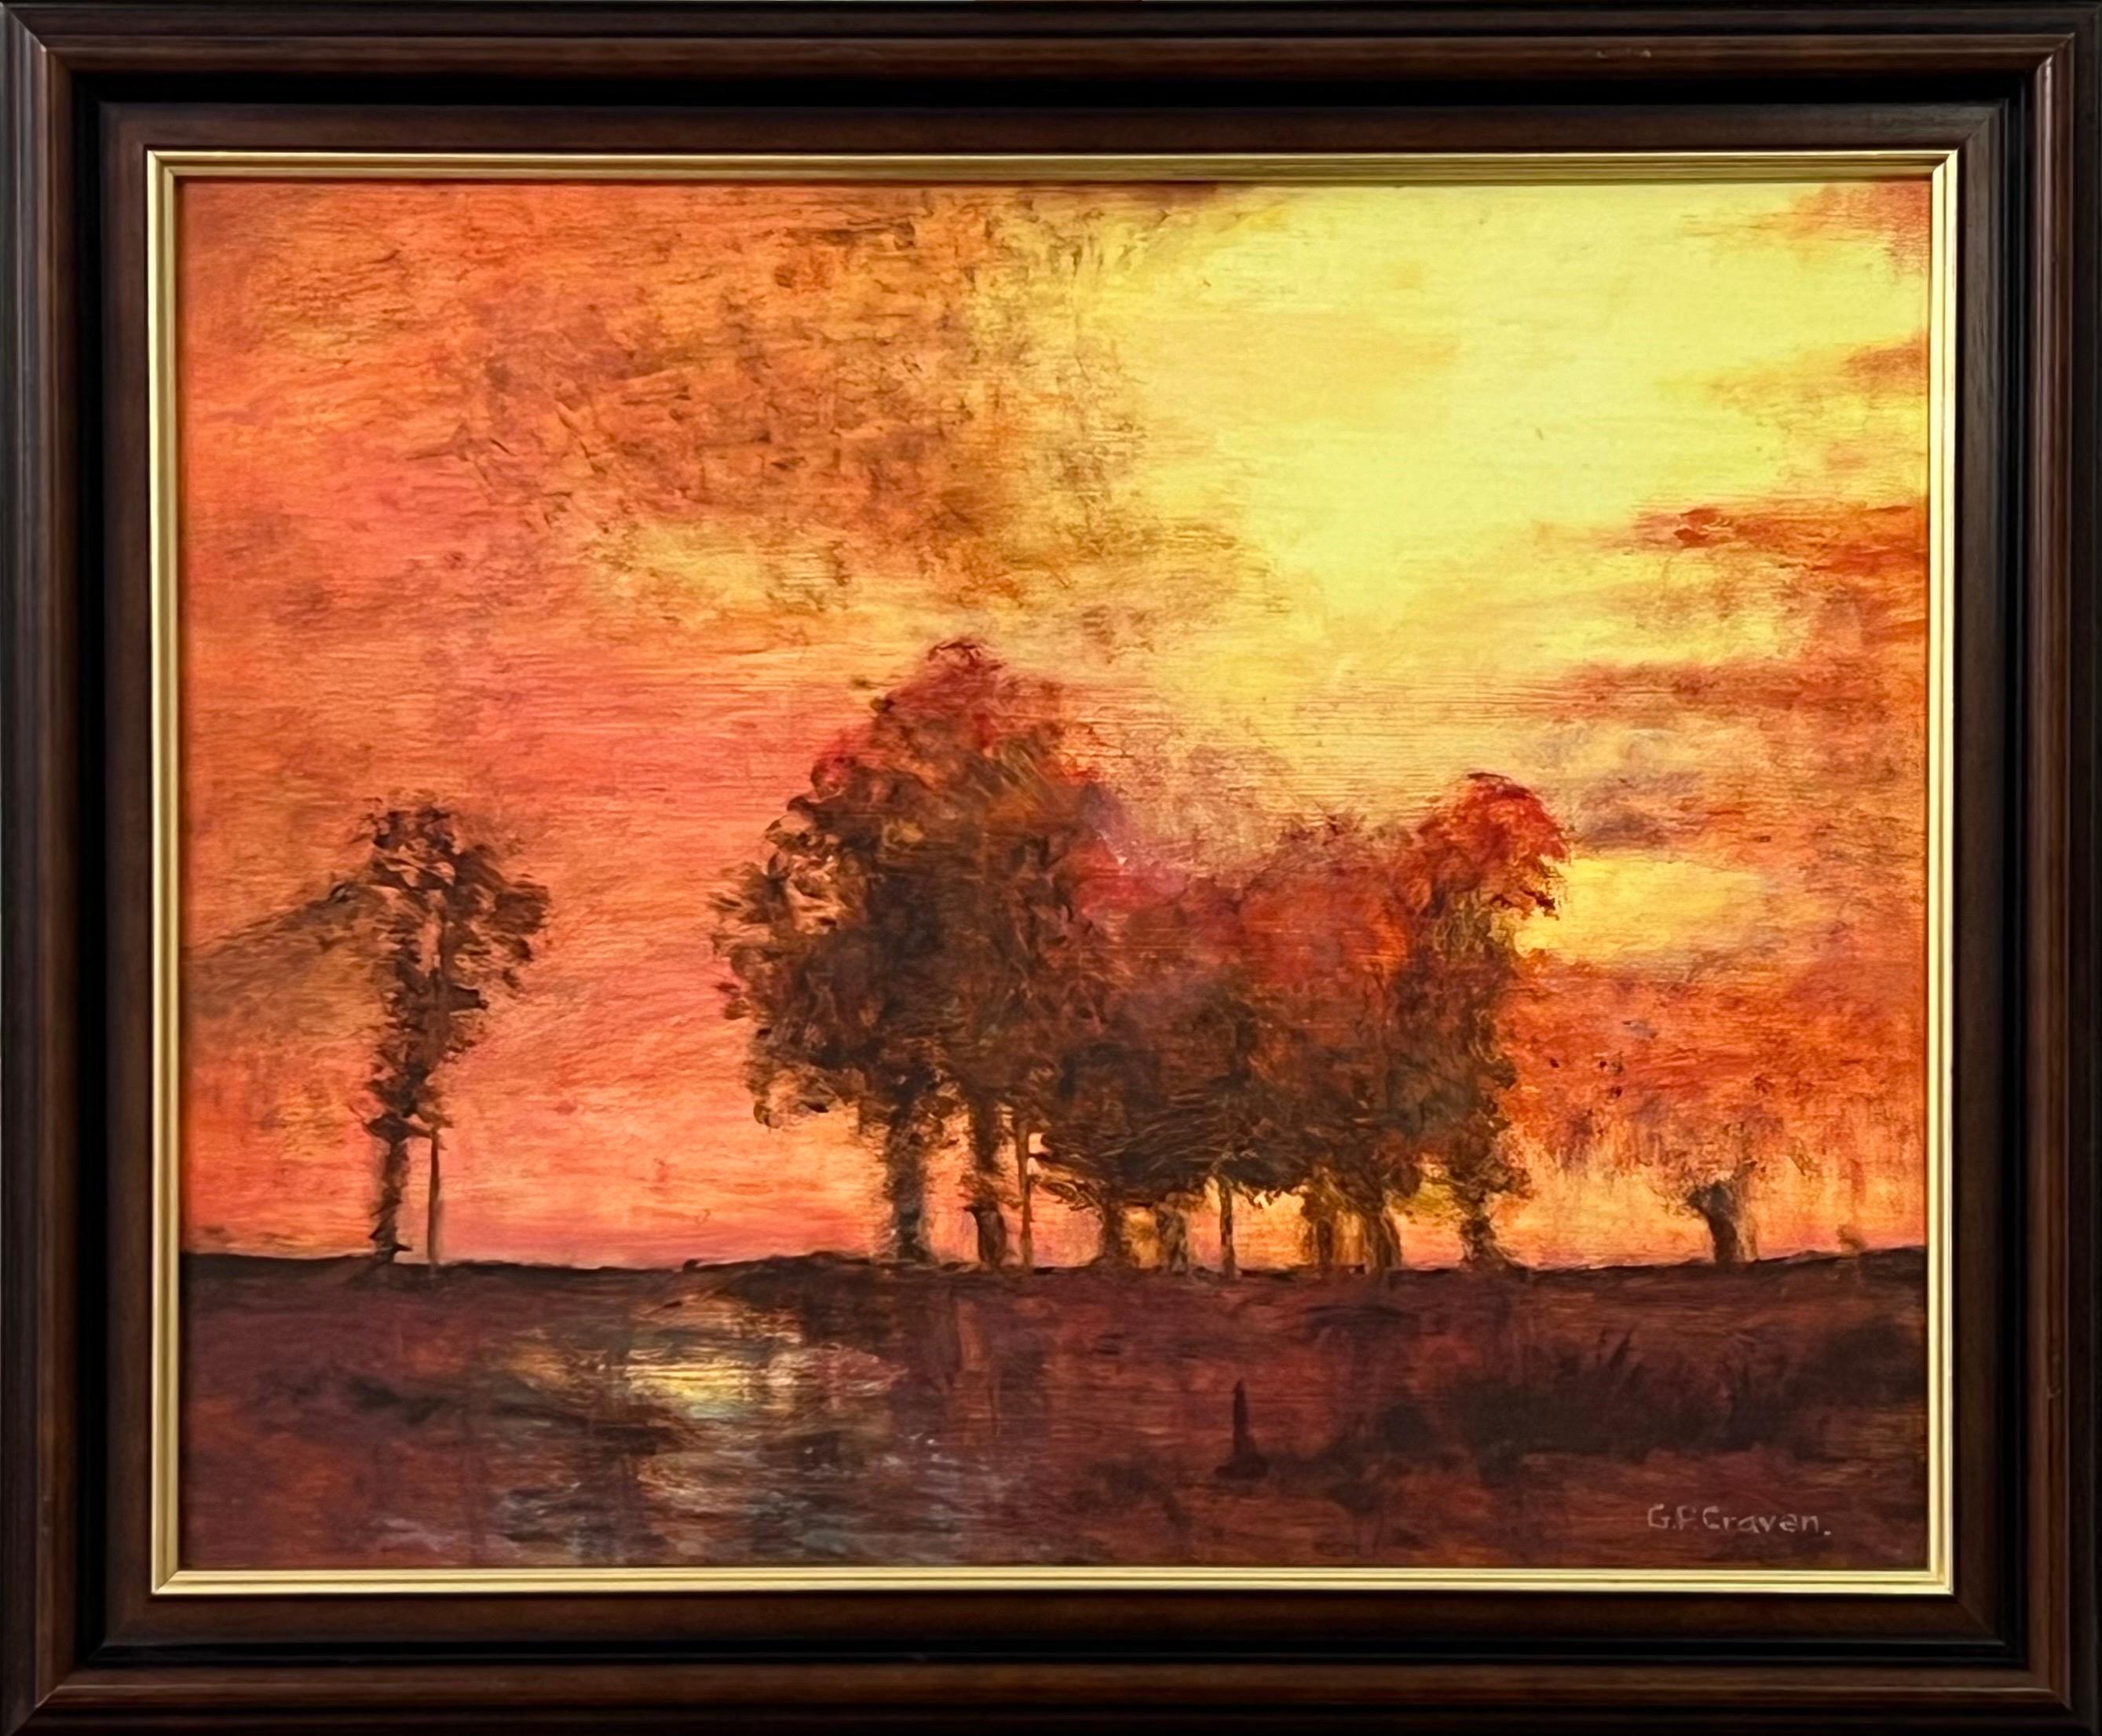 Gabrielle Craven Landscape Painting - Tree Landscape Sunset with Oranges & Yellows by British Artist